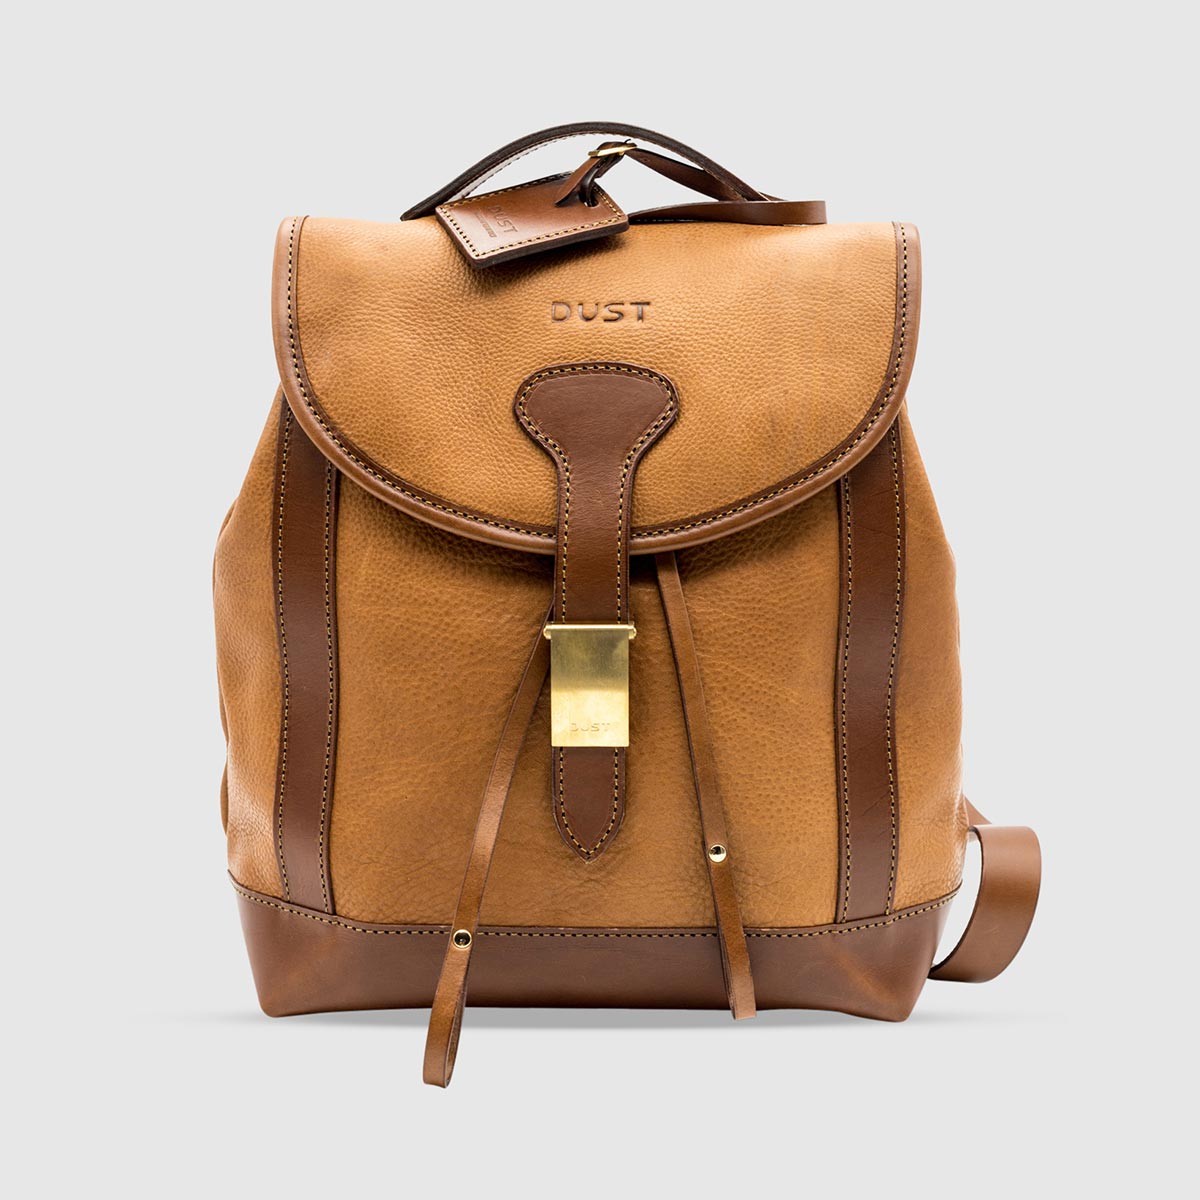 Vegetable Tumbled Leather Backpack  – Light Brown Leather The Dust on sale 2022